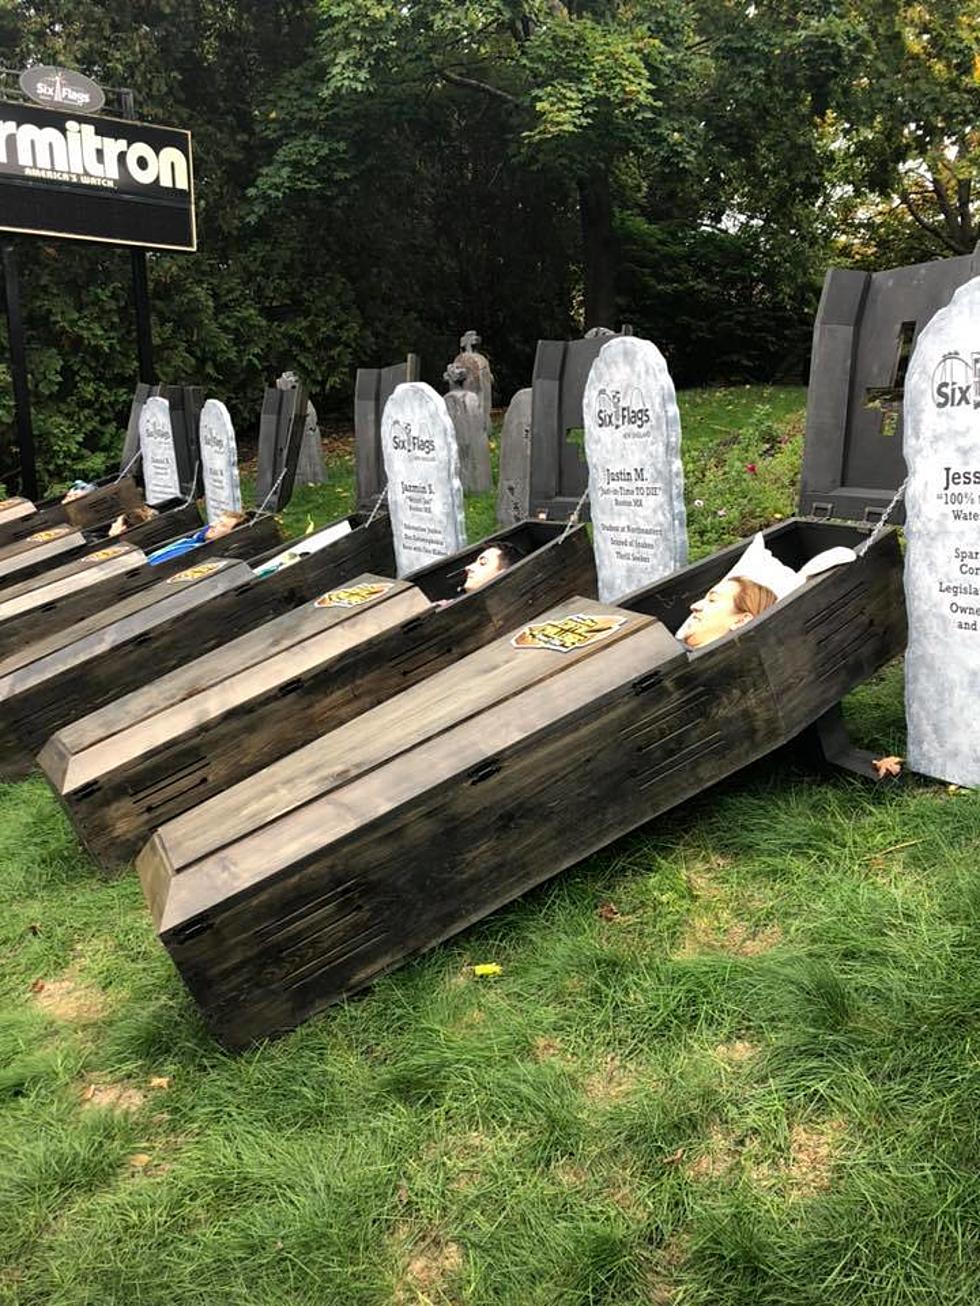 An Open Letter to Six Flags&#8217; &#8216;Coffin Challenge&#8217; Organizers